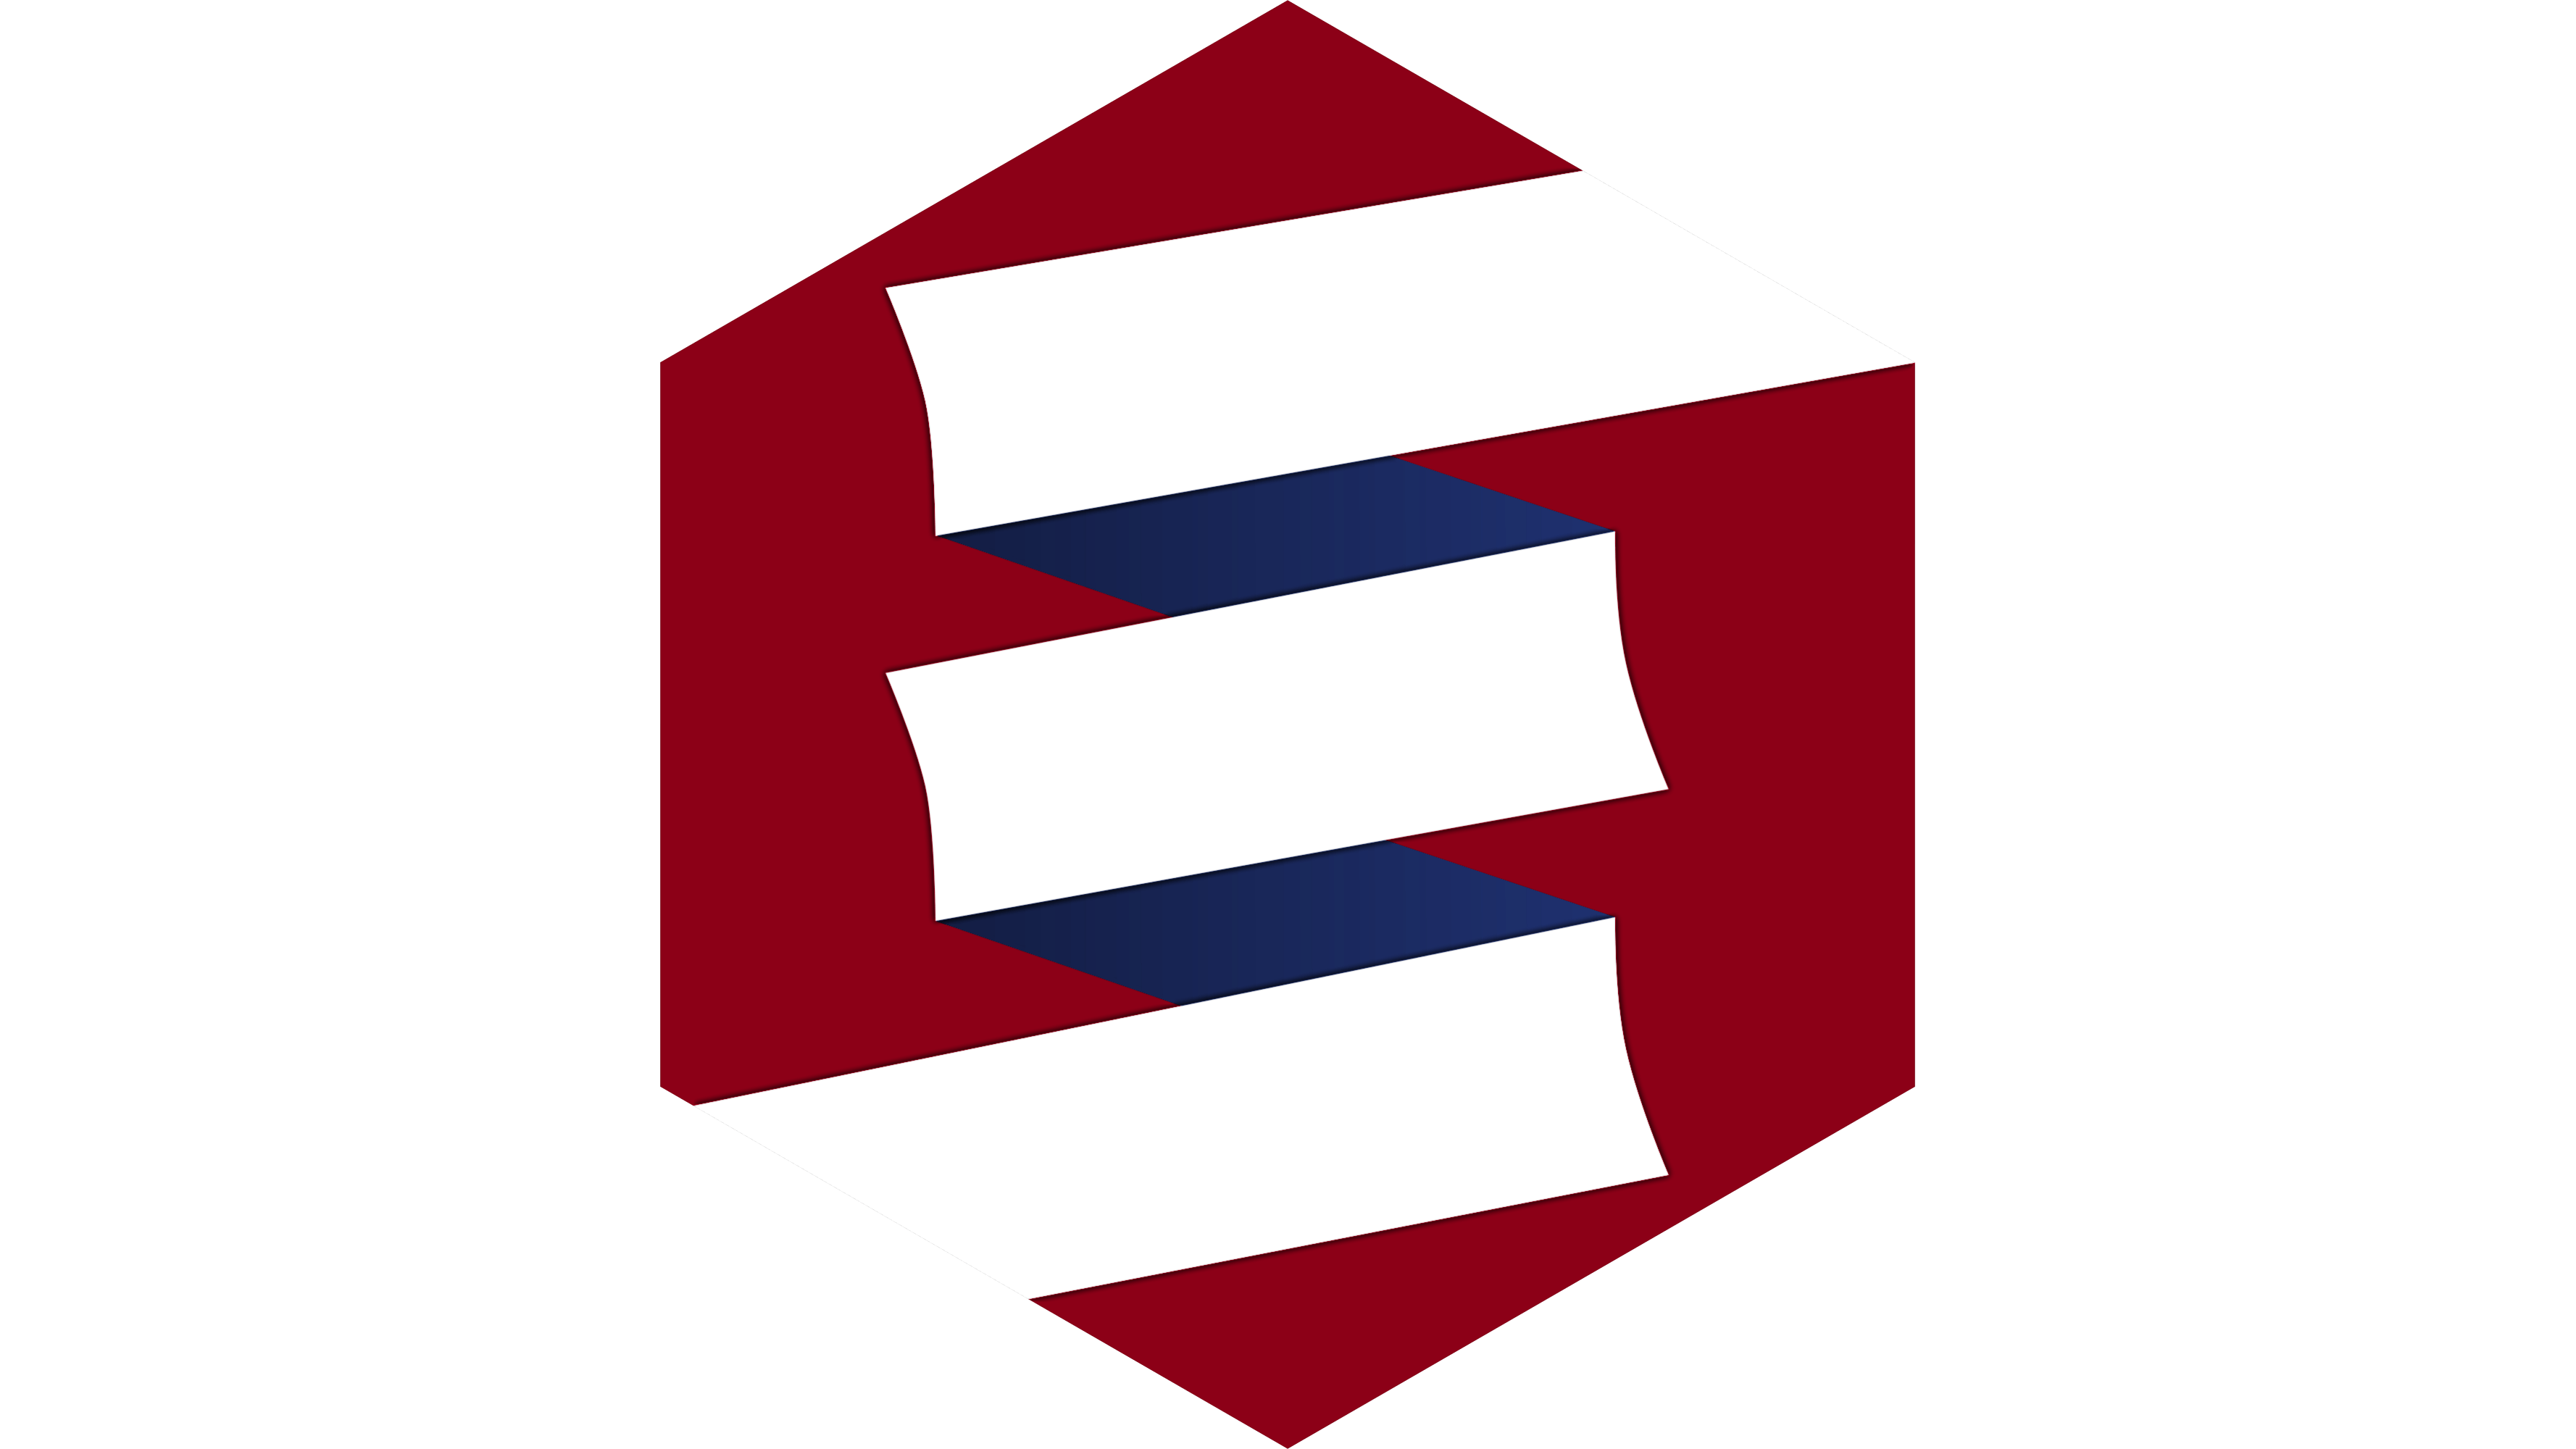 The Scala logo, in the shape of a hexagon, meant to fit the logos of certain well known libraries, as a hint 😜